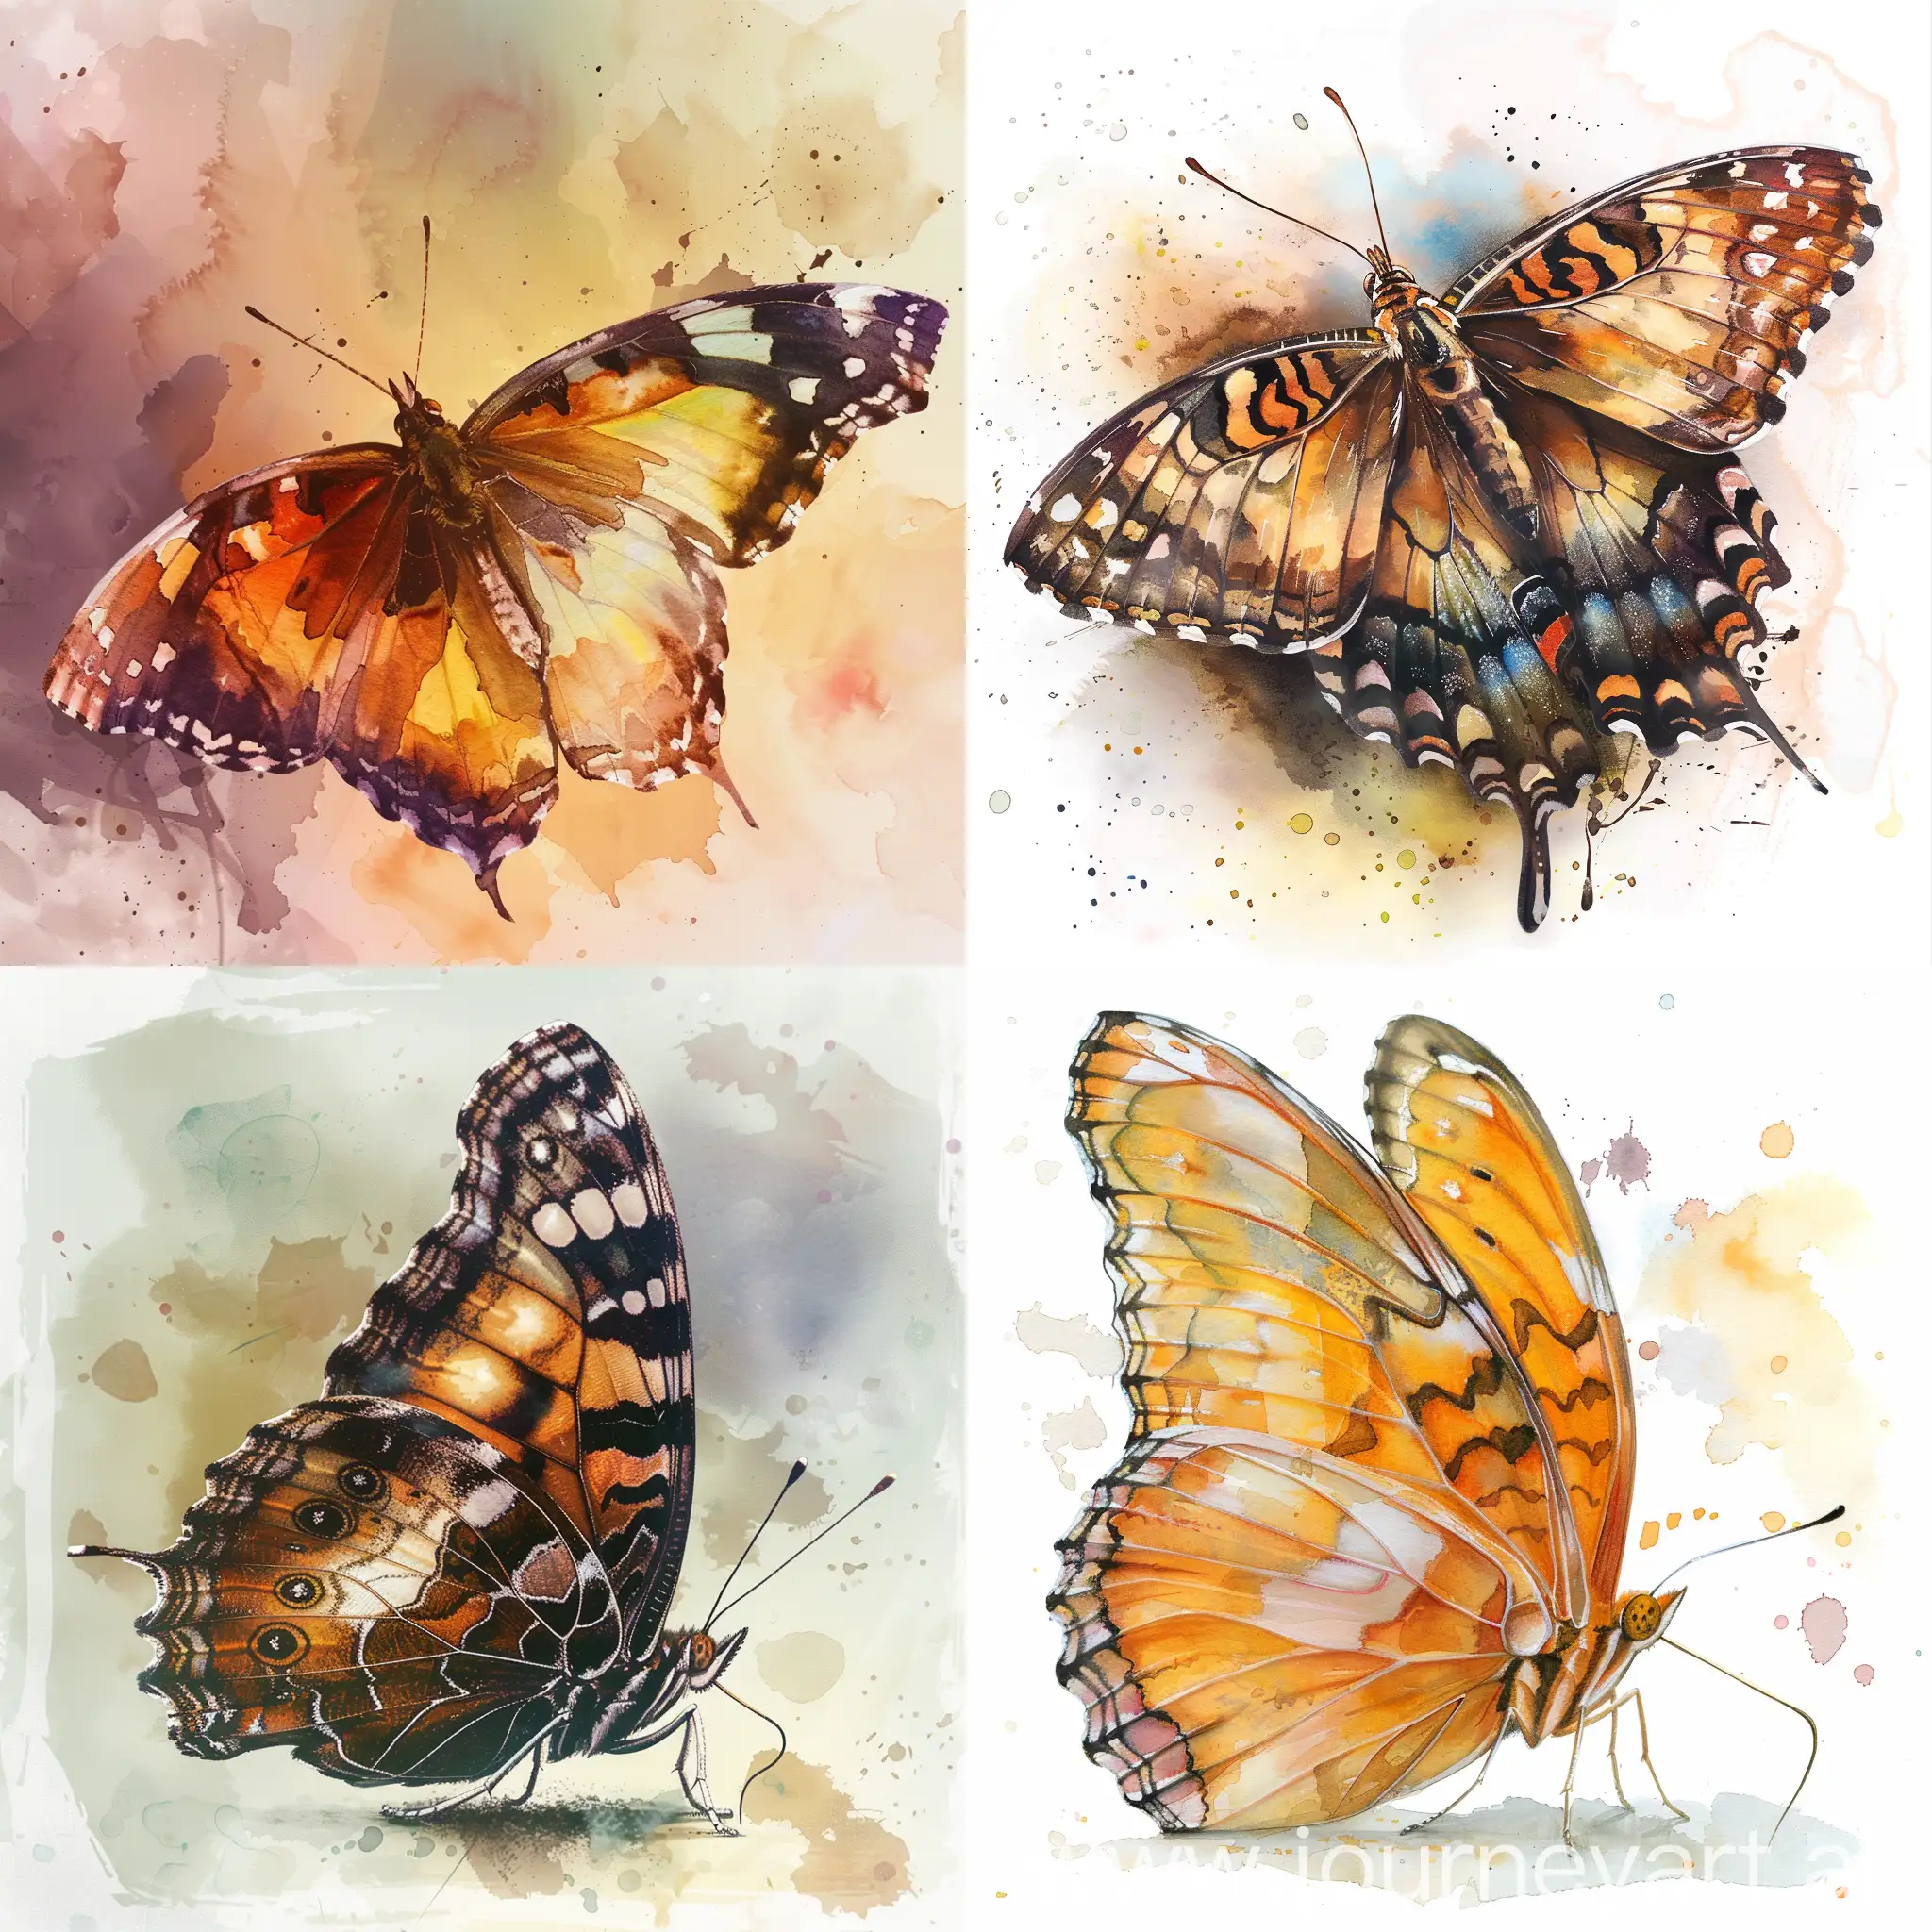 Closeup-Butterfly-in-HighQuality-Watercolor-Style